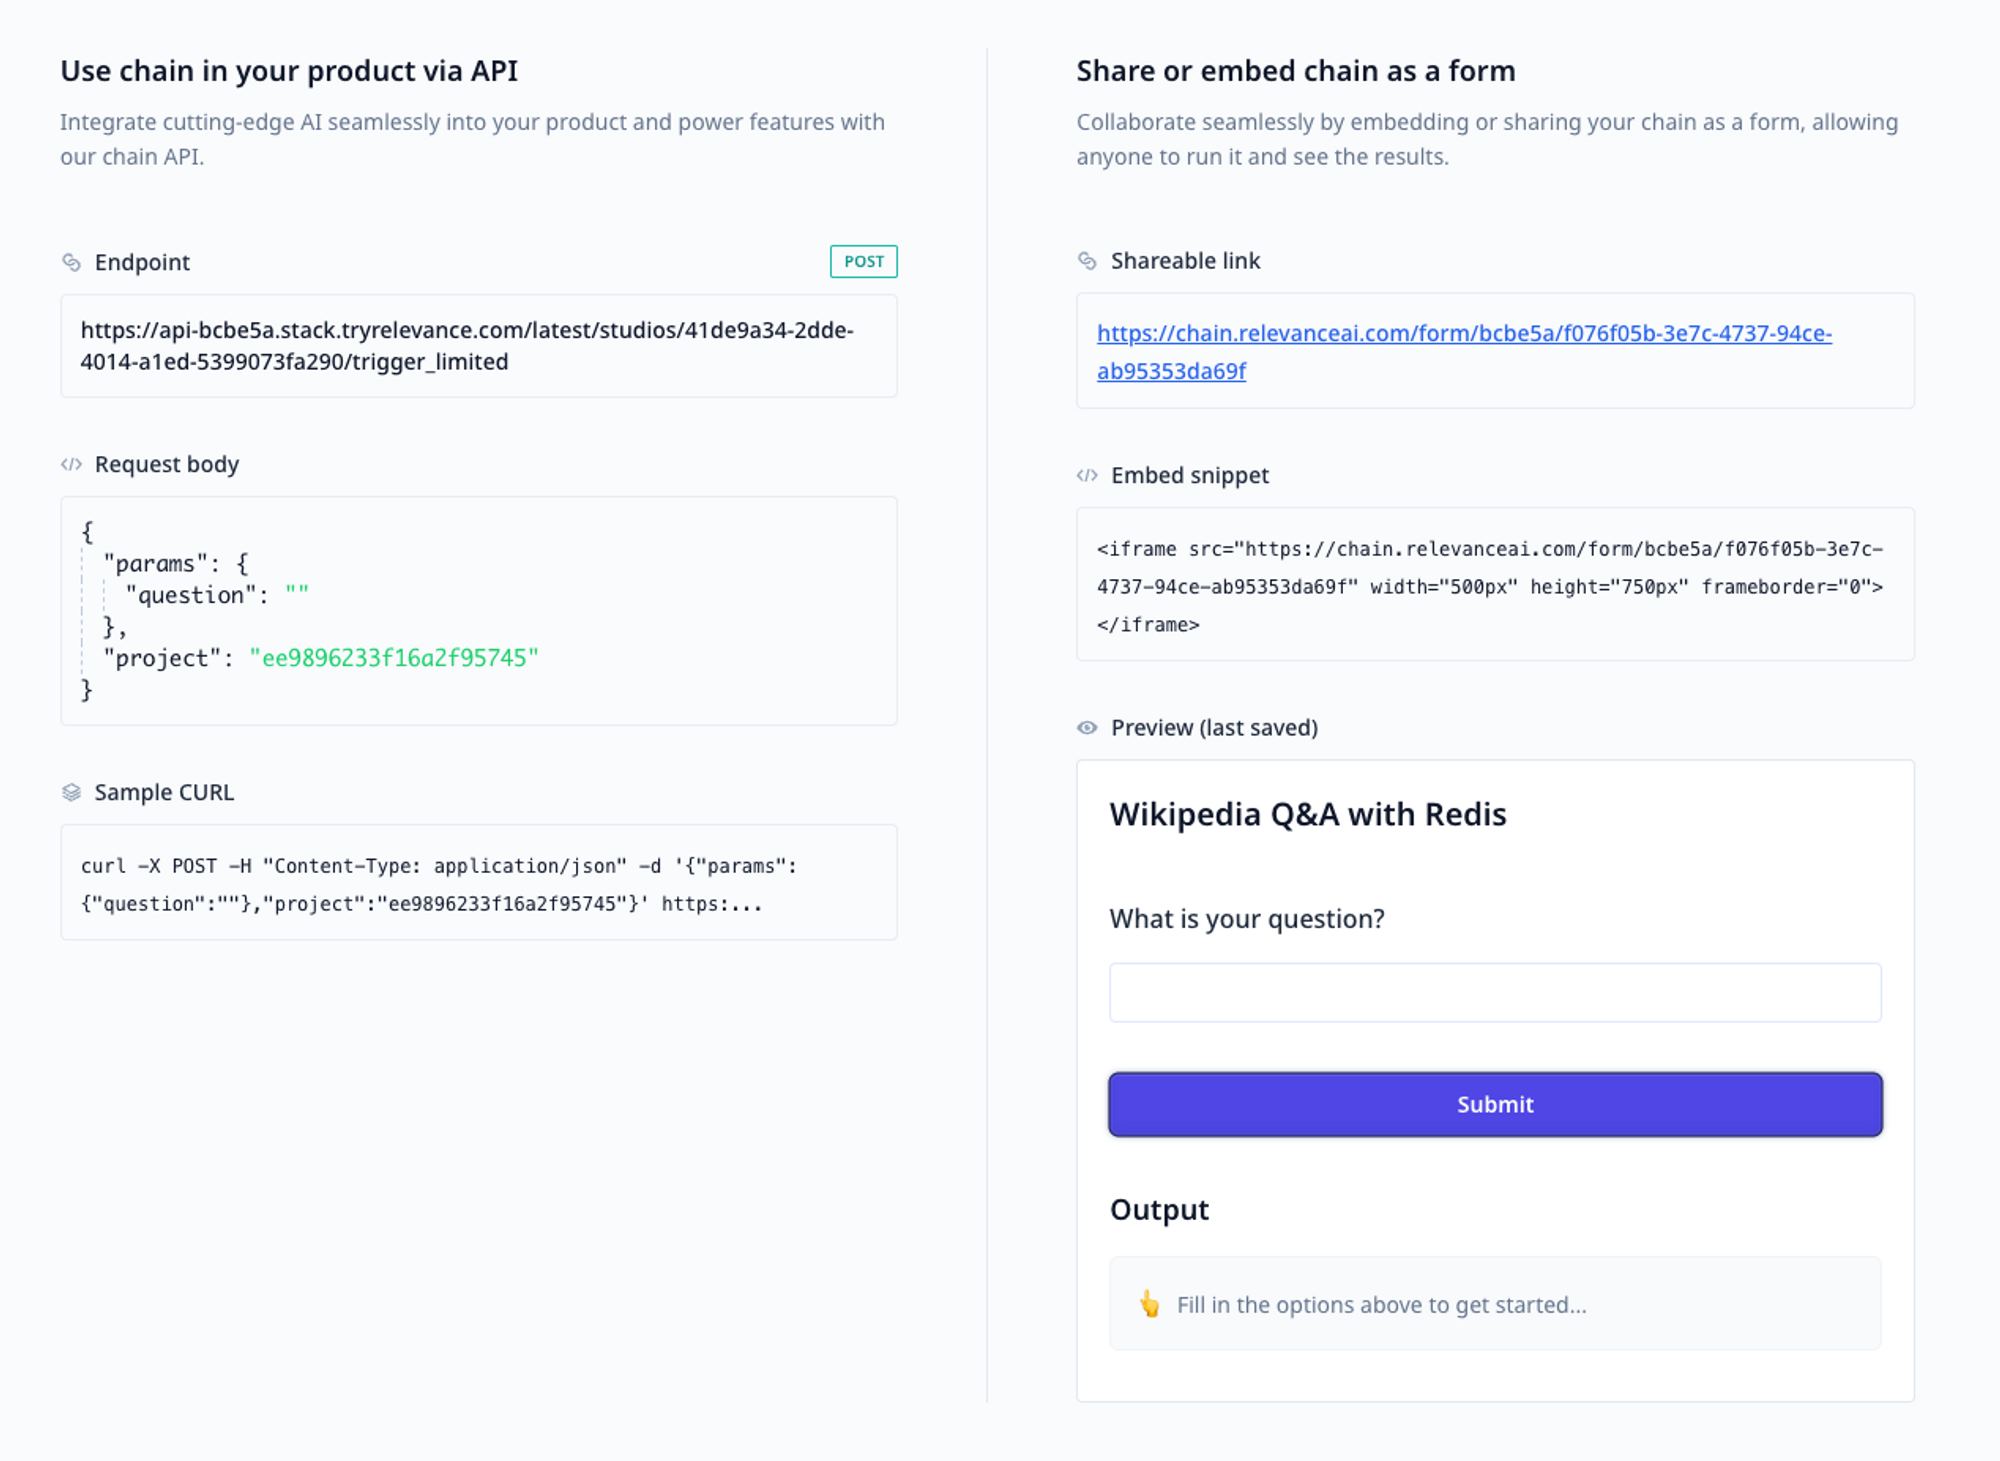 The deploy page for a chain with a production-ready API endpoint or shareable URL form